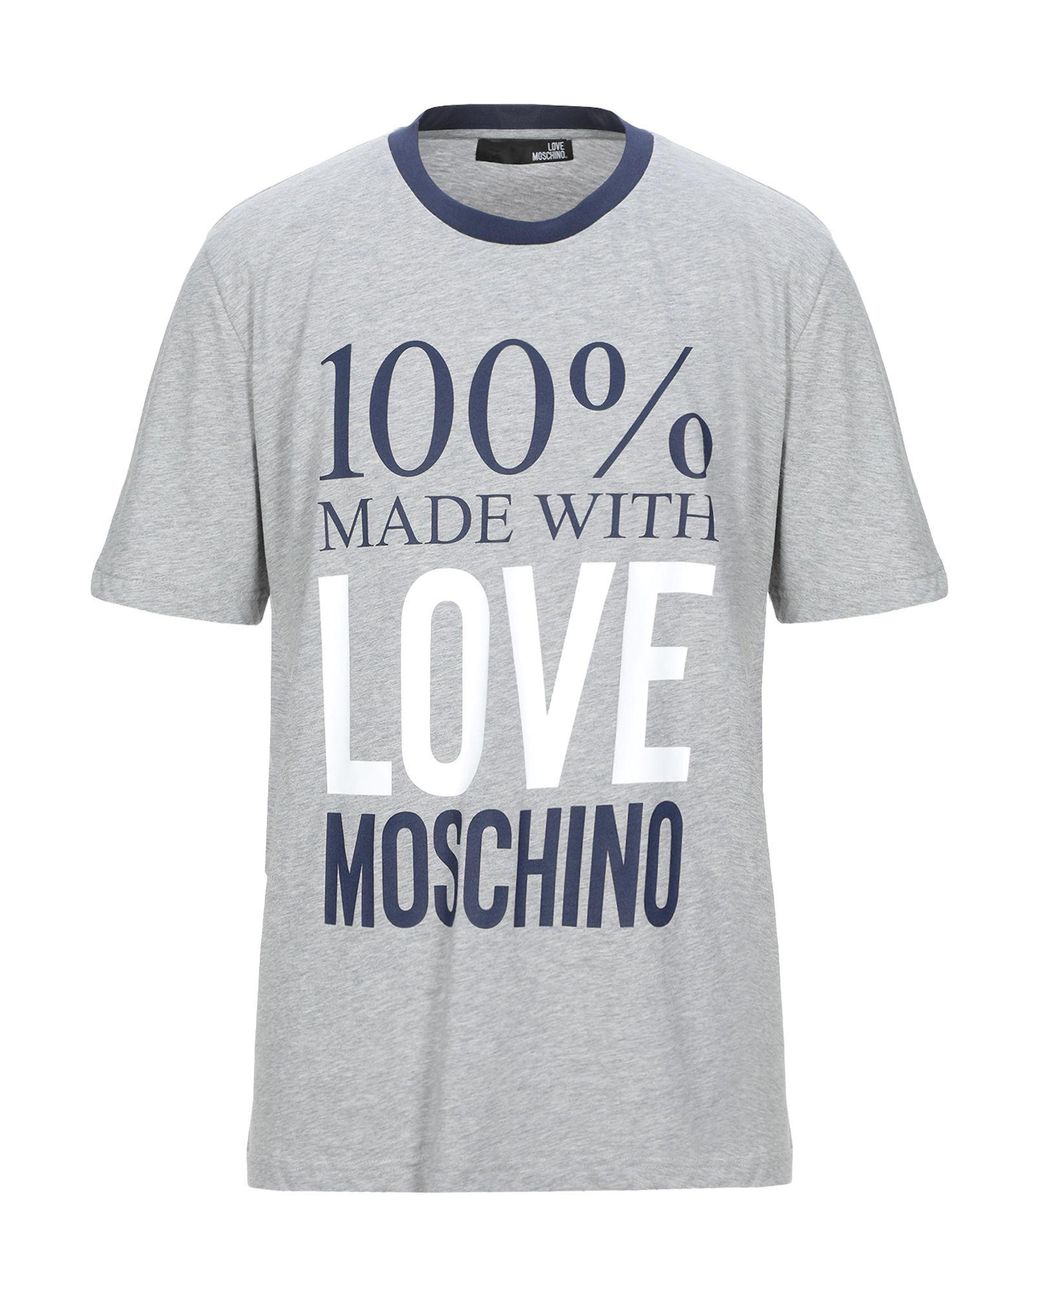 Love Moschino Cotton T-shirt in Grey (Gray) for Men - Lyst